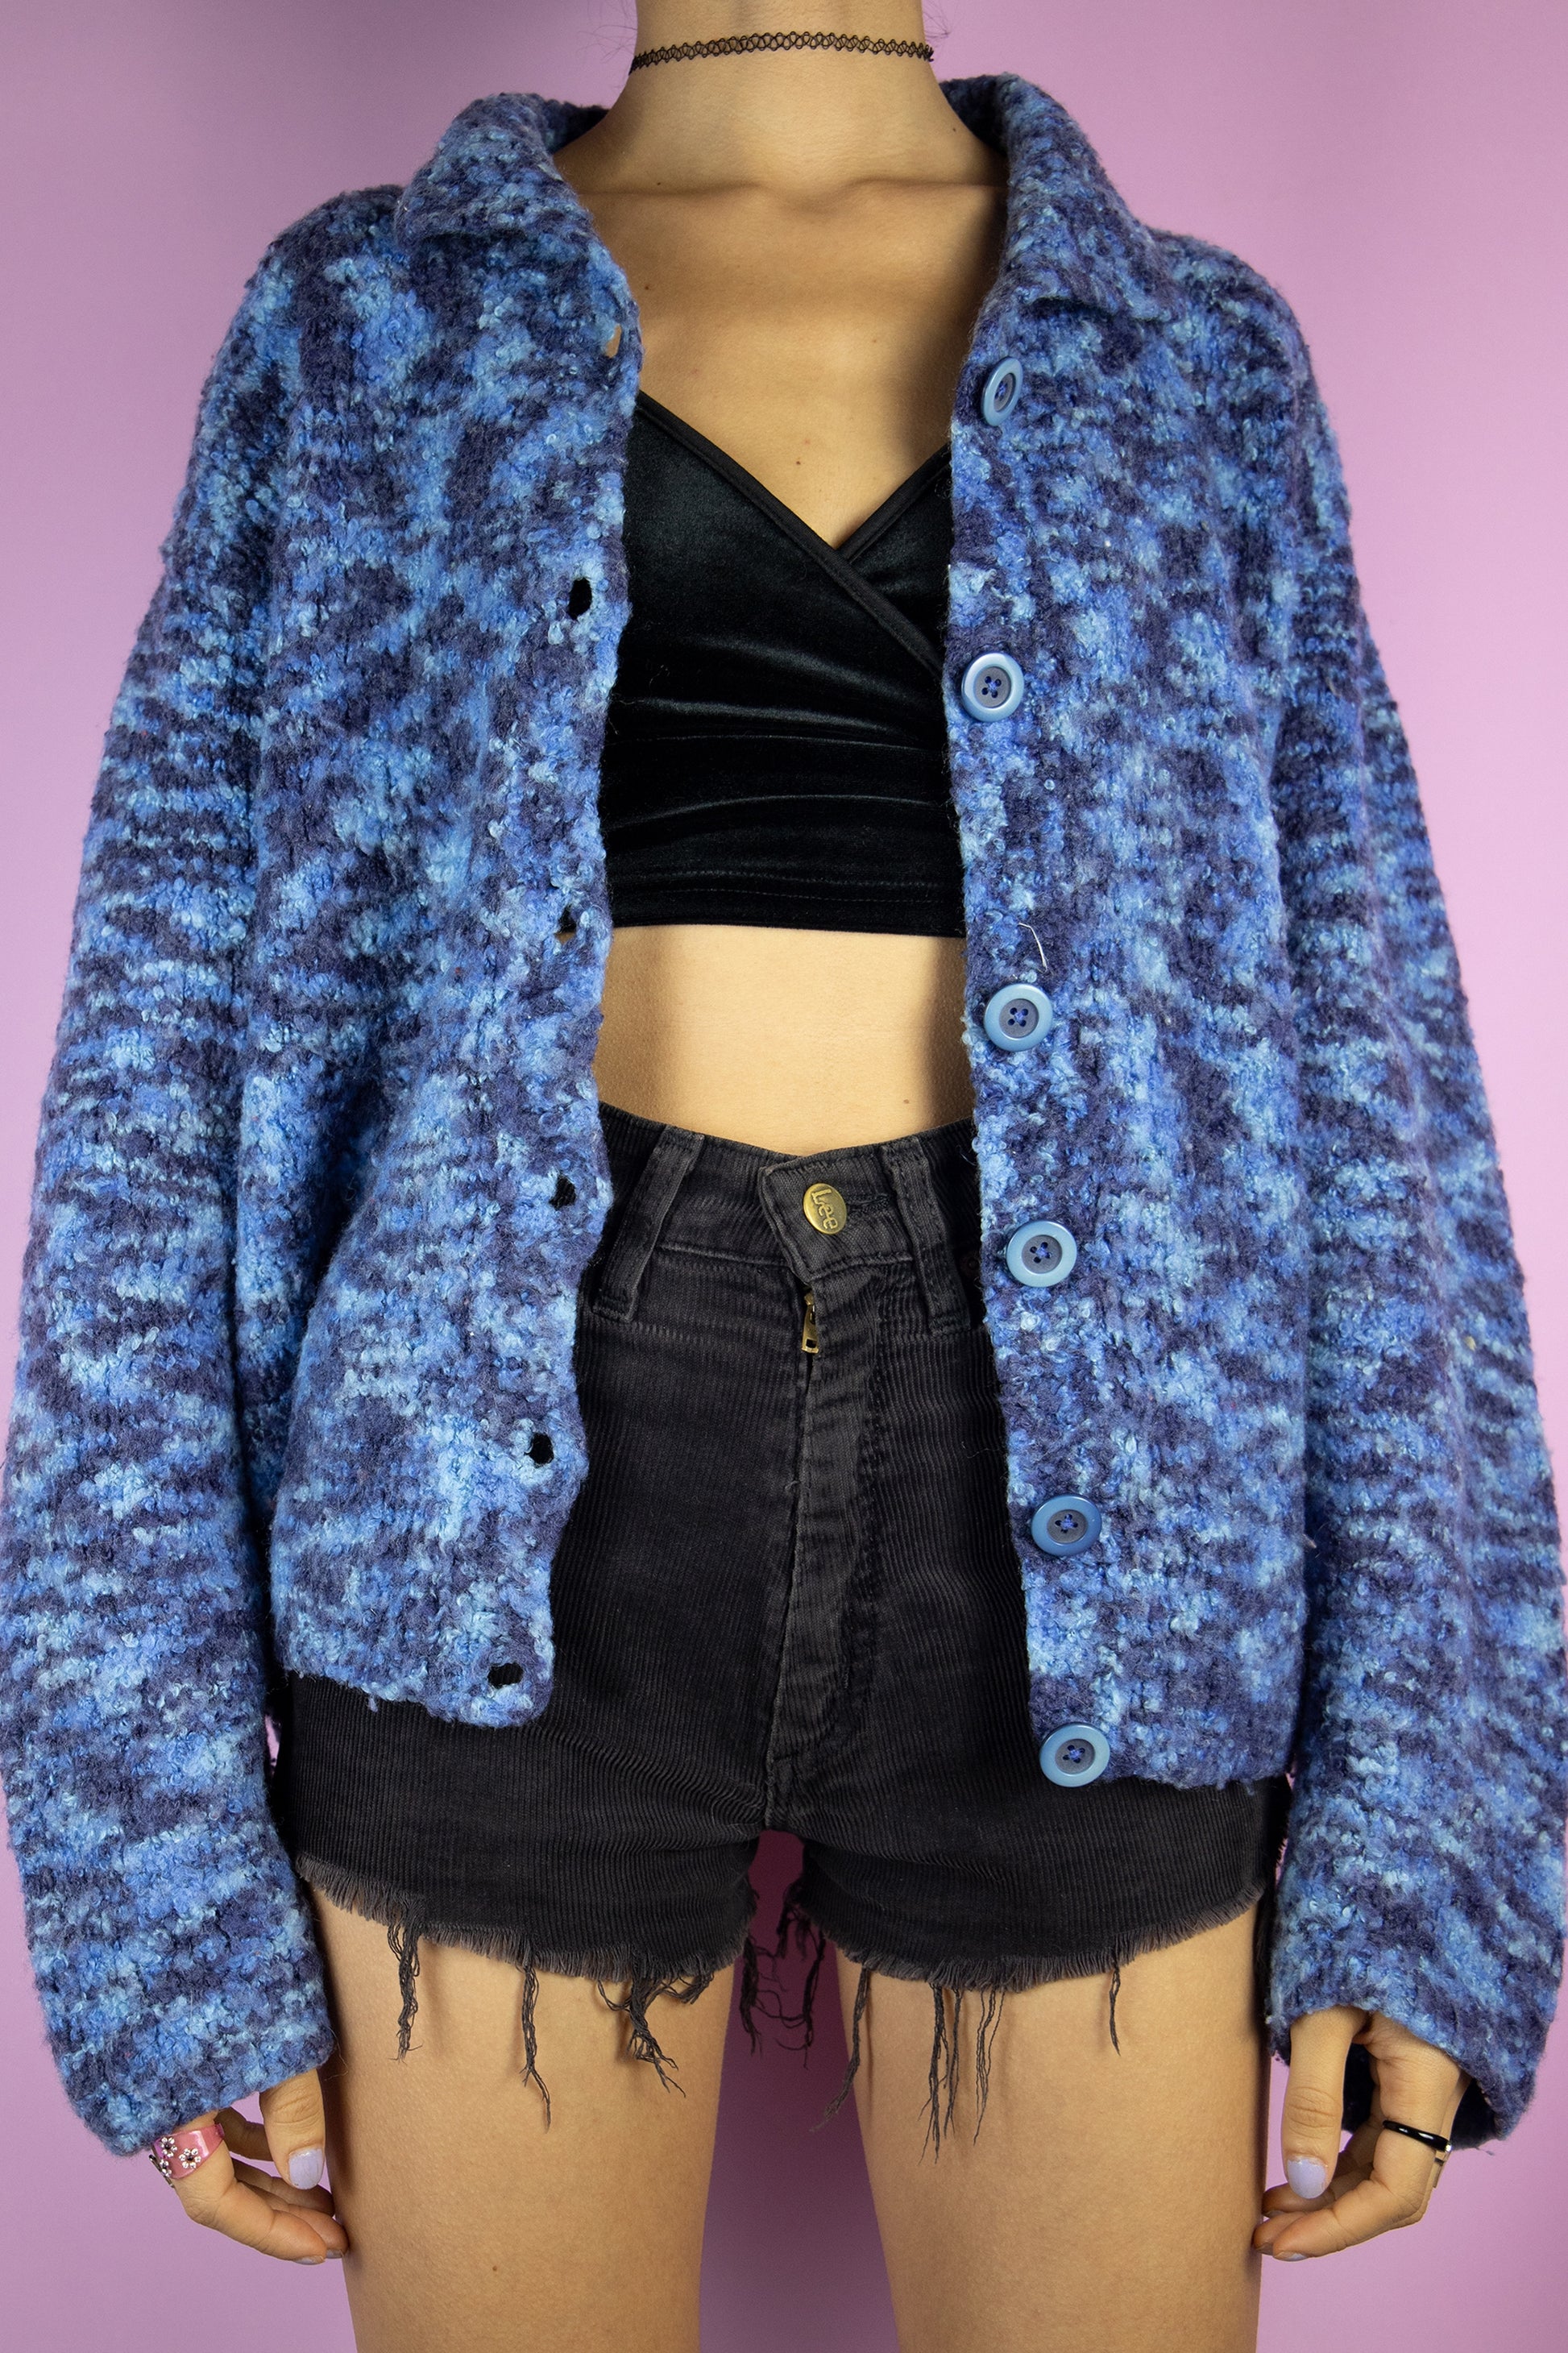 The Vintage 90s Boho Blue Cardigan is a chunky knit blue cardigan with a collar and buttons. Retro grunge 1990s winter sweater.